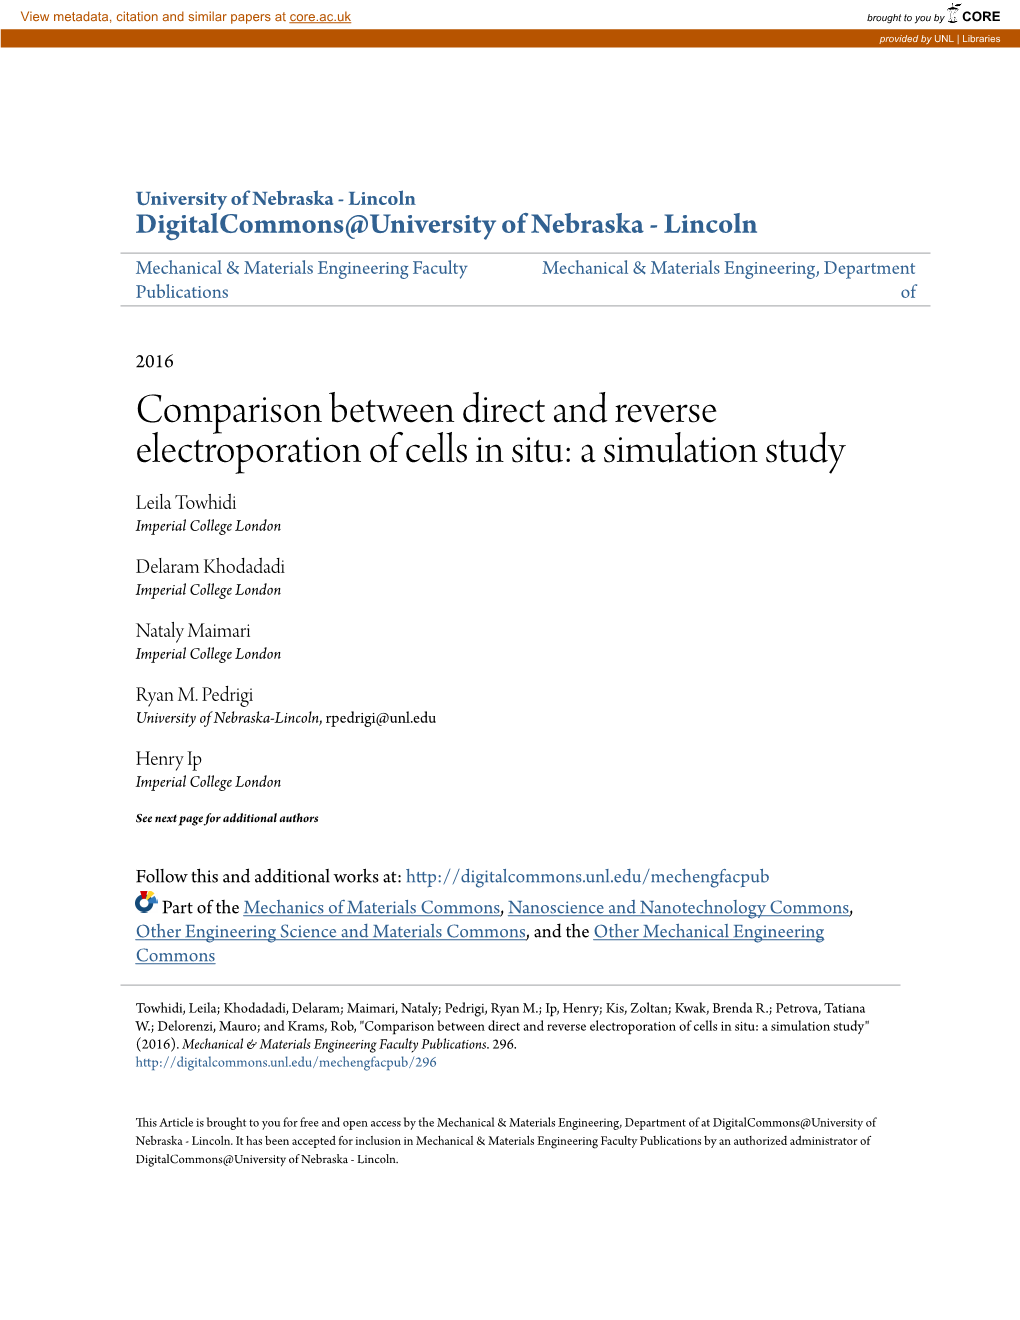 Comparison Between Direct and Reverse Electroporation of Cells in Situ: a Simulation Study Leila Towhidi Imperial College London